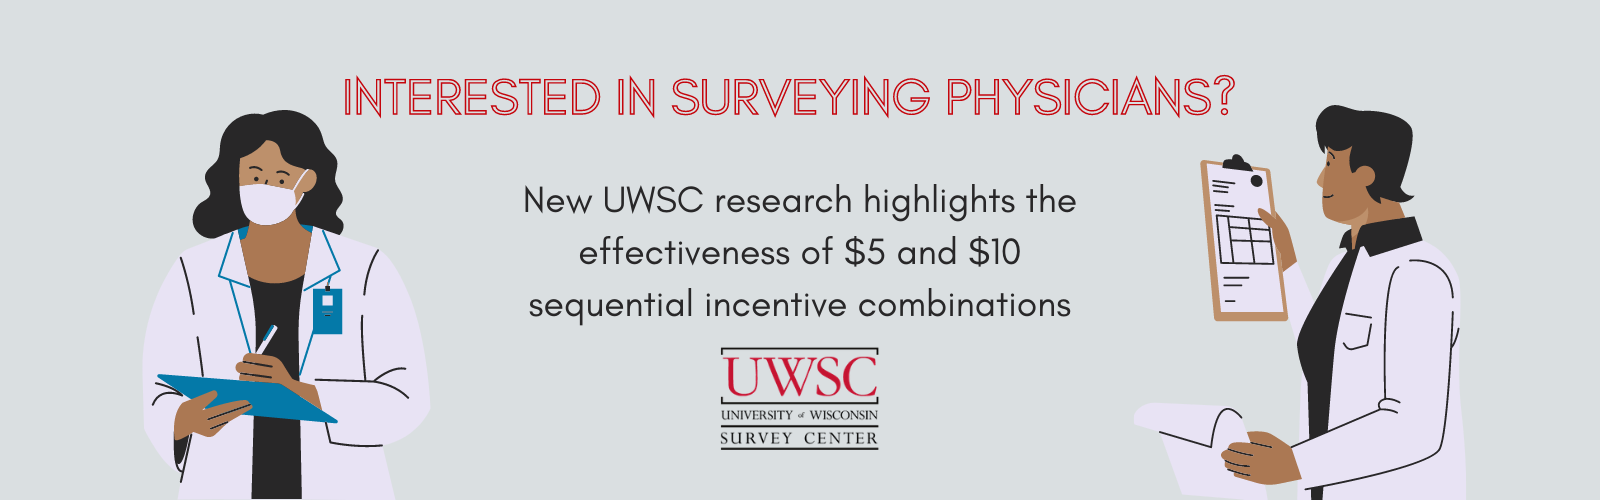 Interested in surveying physicians? New UWSC research highlights the effectiveness of $5 and $10 sequential incentive combinations